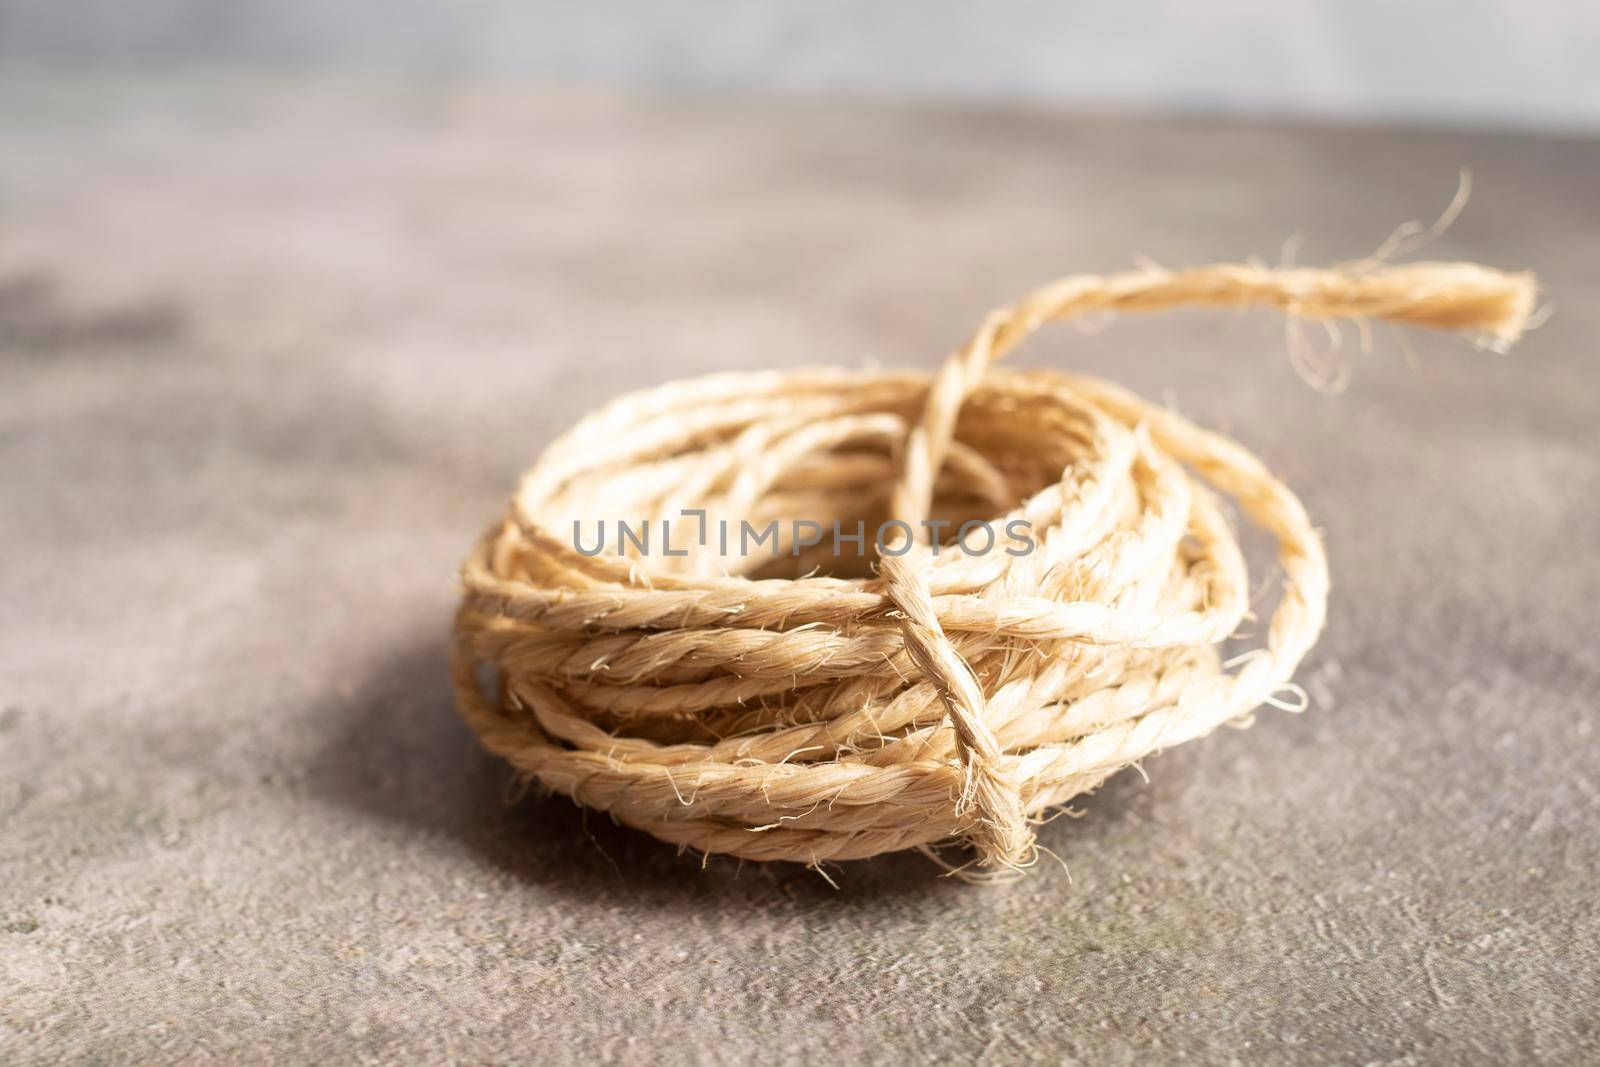 View of a roll of rope on a golden background